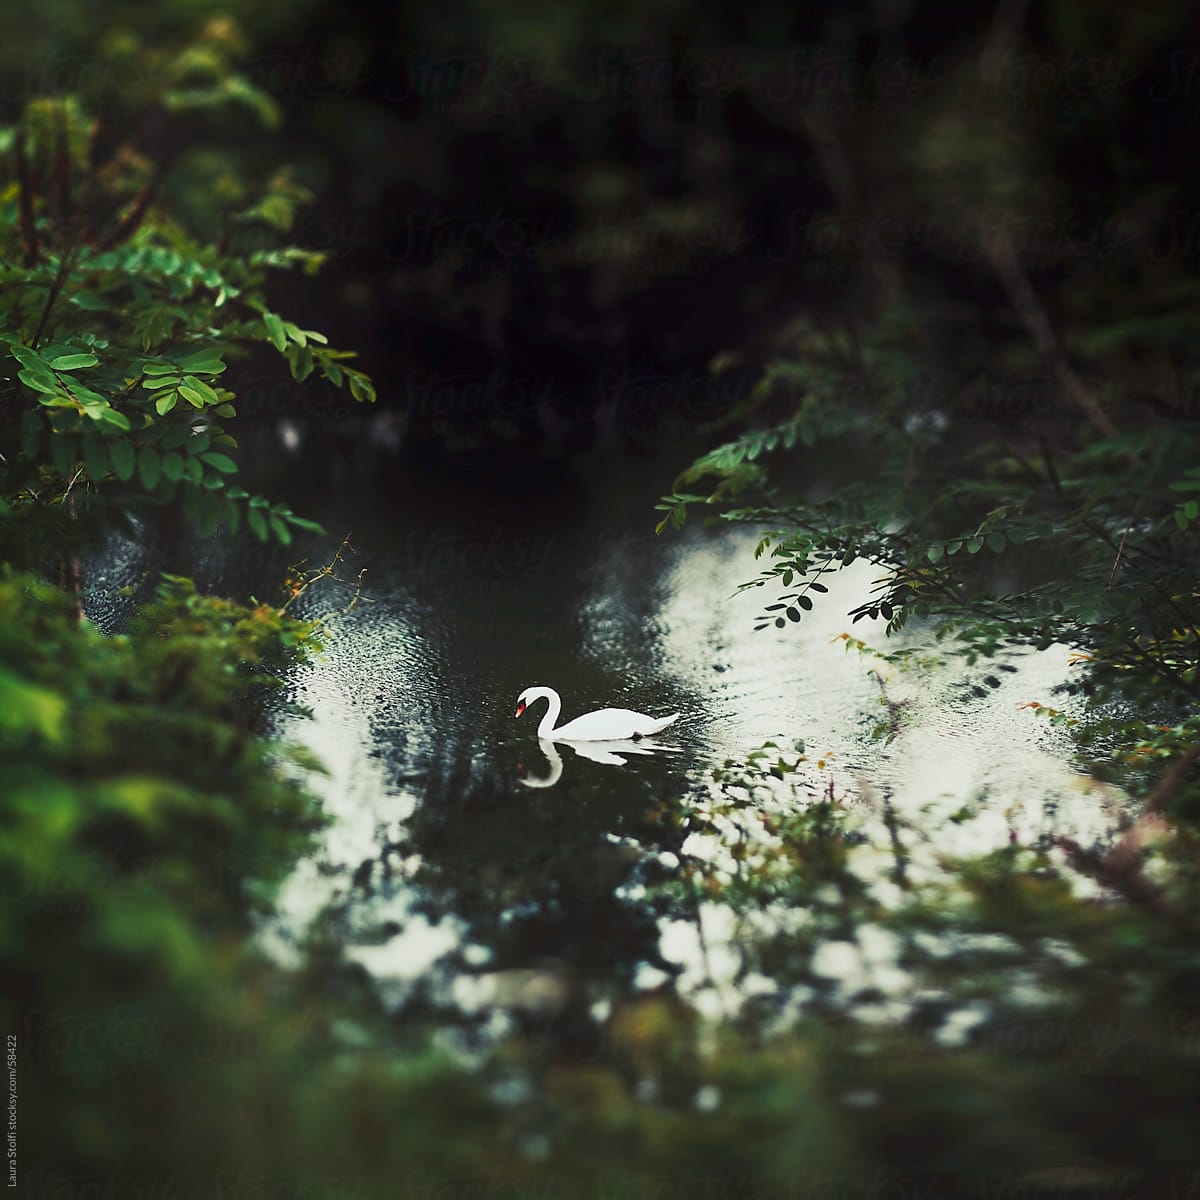 Adult white swan floating in placid river water seen through trees and shrubs